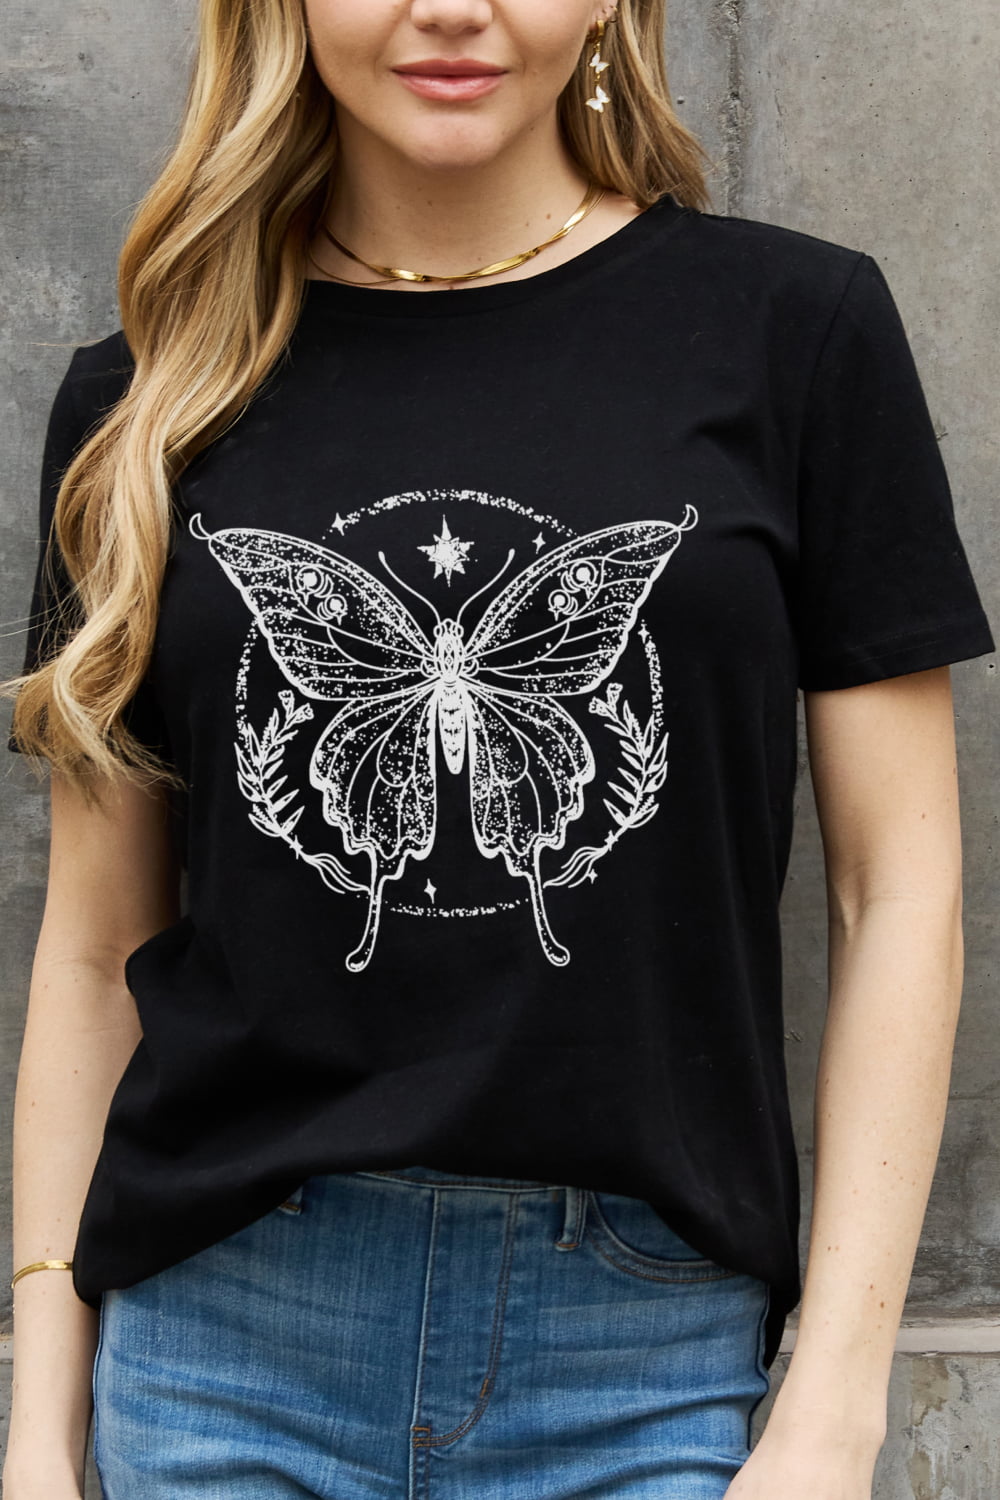 Simply Love Simply Love Full Size Butterfly Graphic Cotton Tee